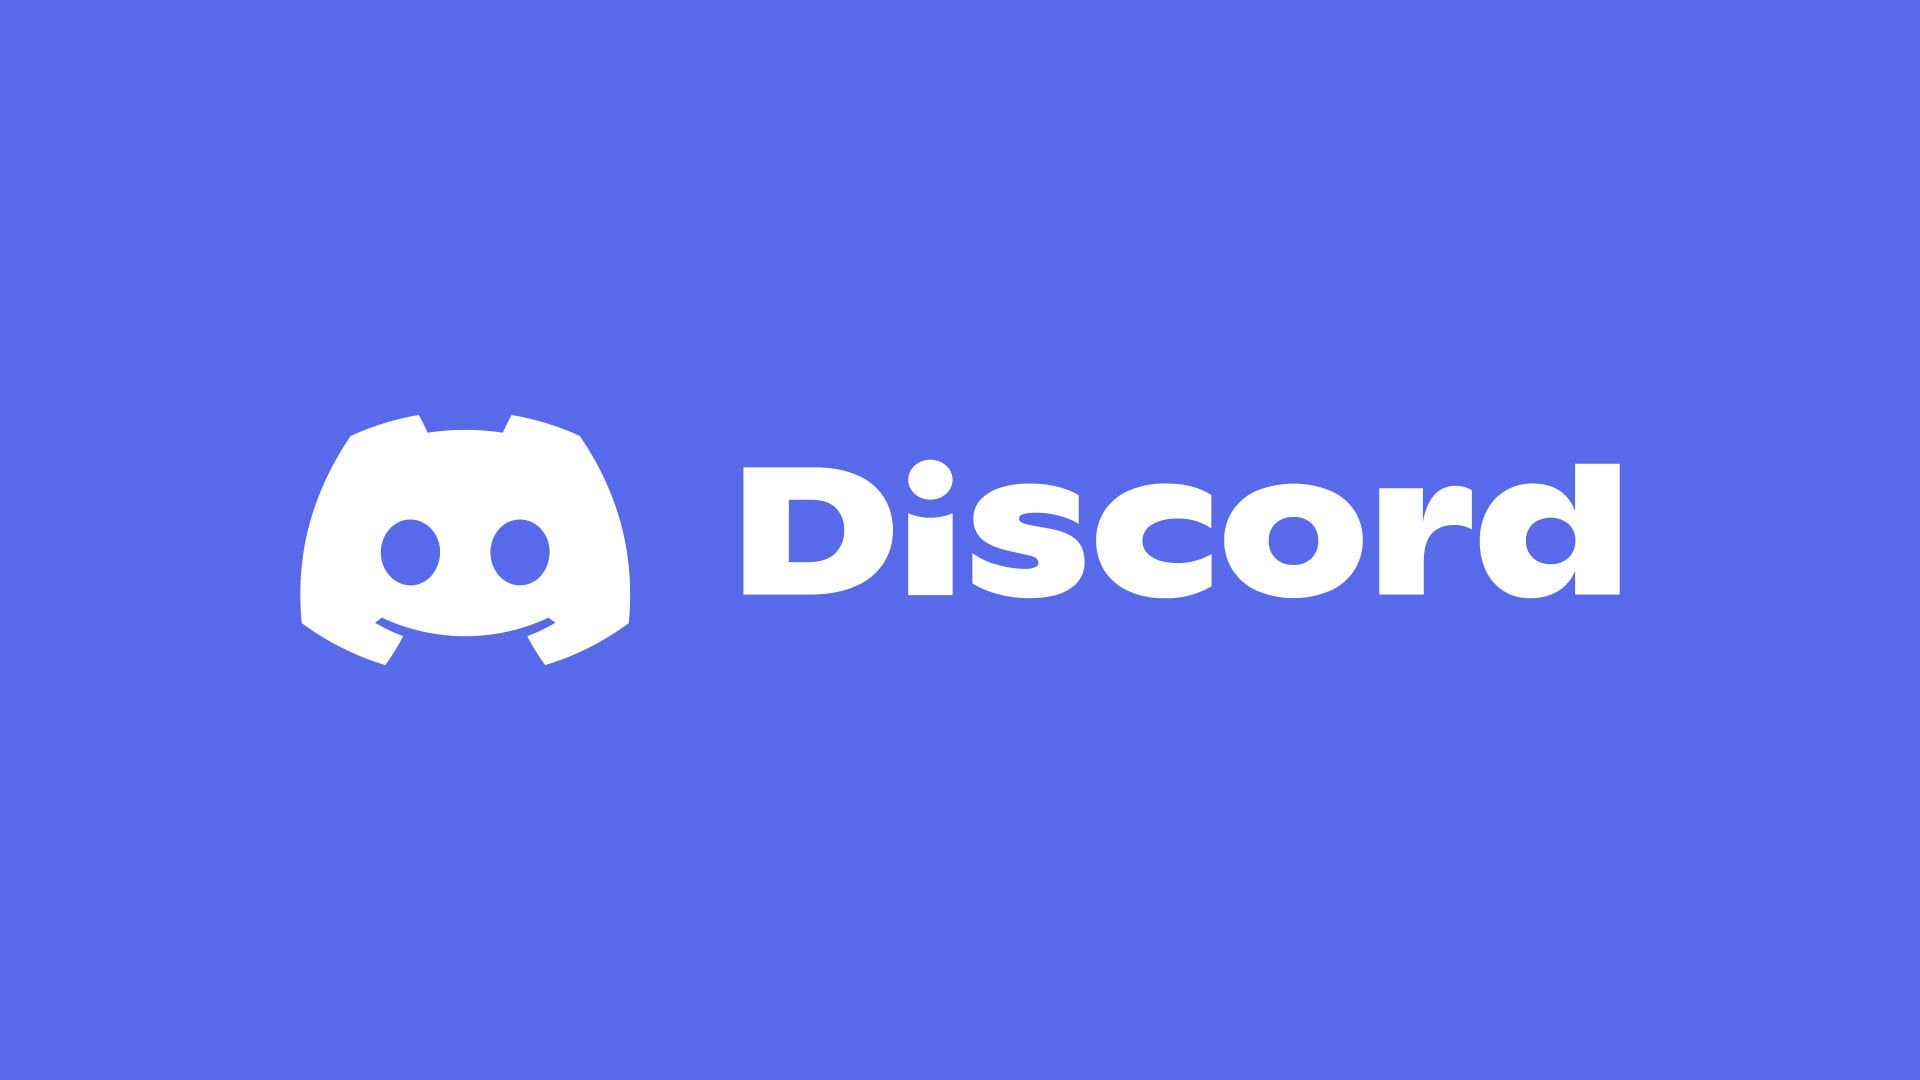 Title: “Computer Version of Discord Crashes: Users Left in Disarray”